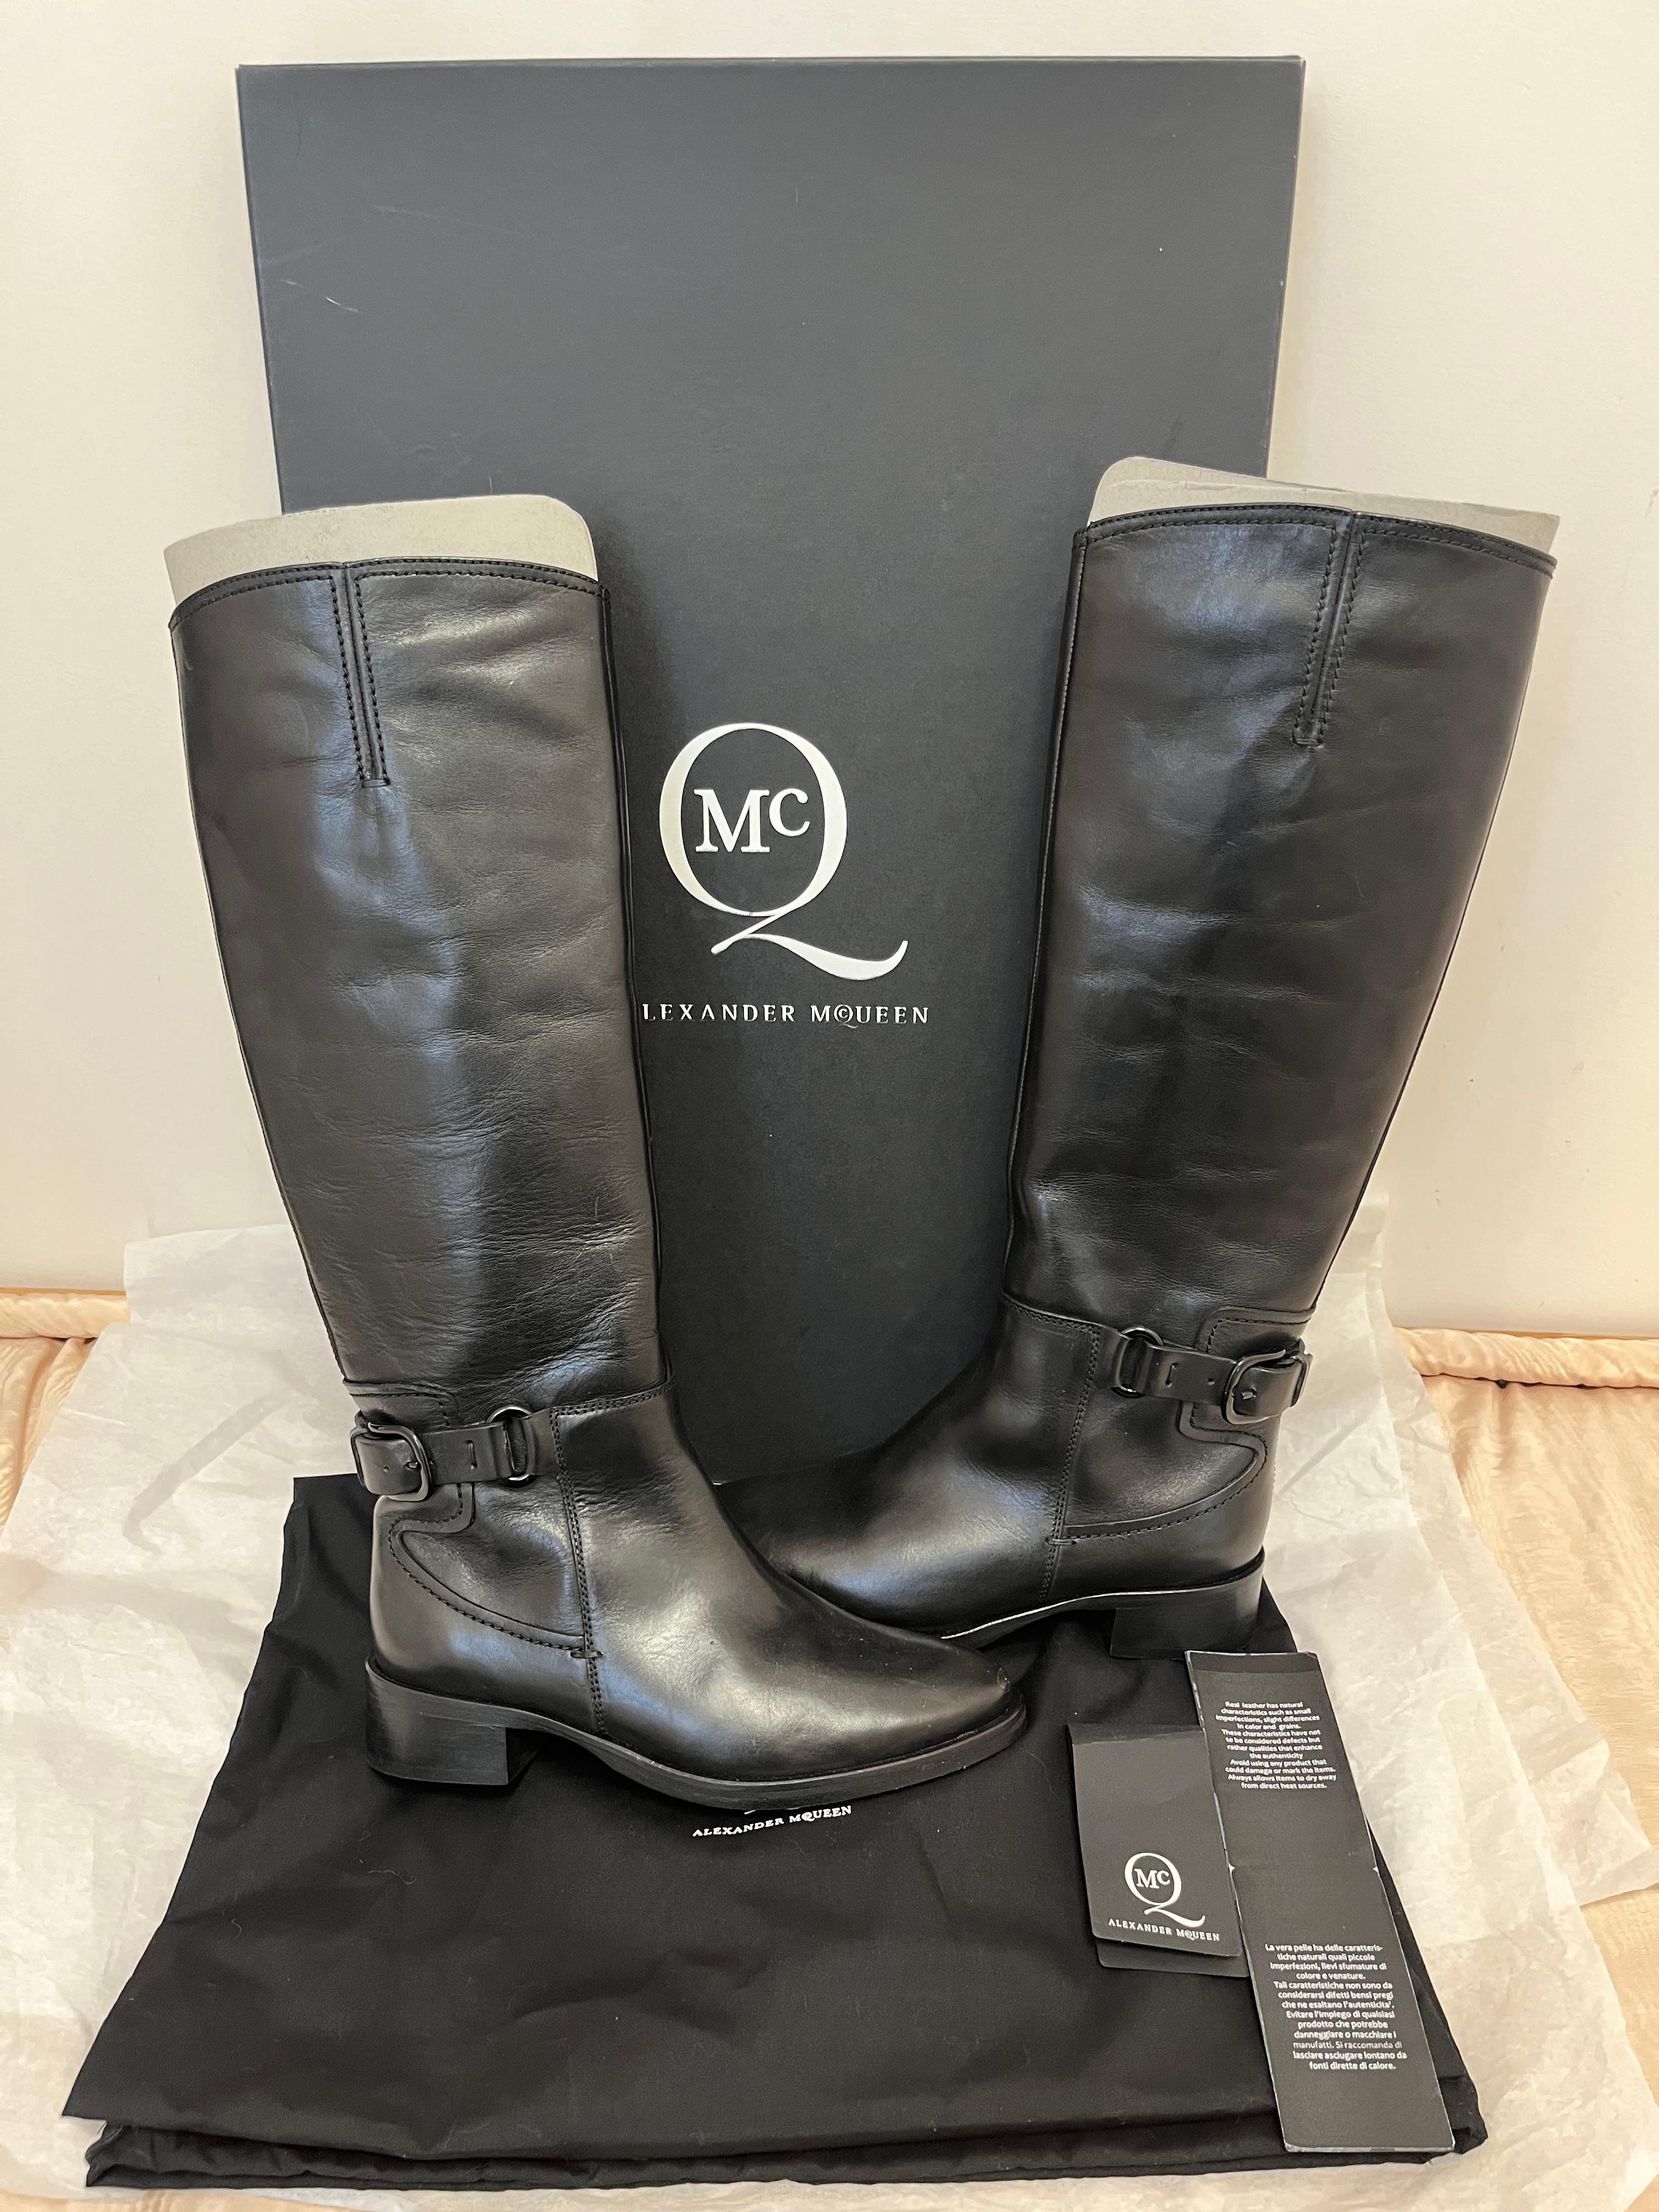 Alexander McQueen Bridal Riding Boots Size 7 w/Box, Dust Bag and Literature 7